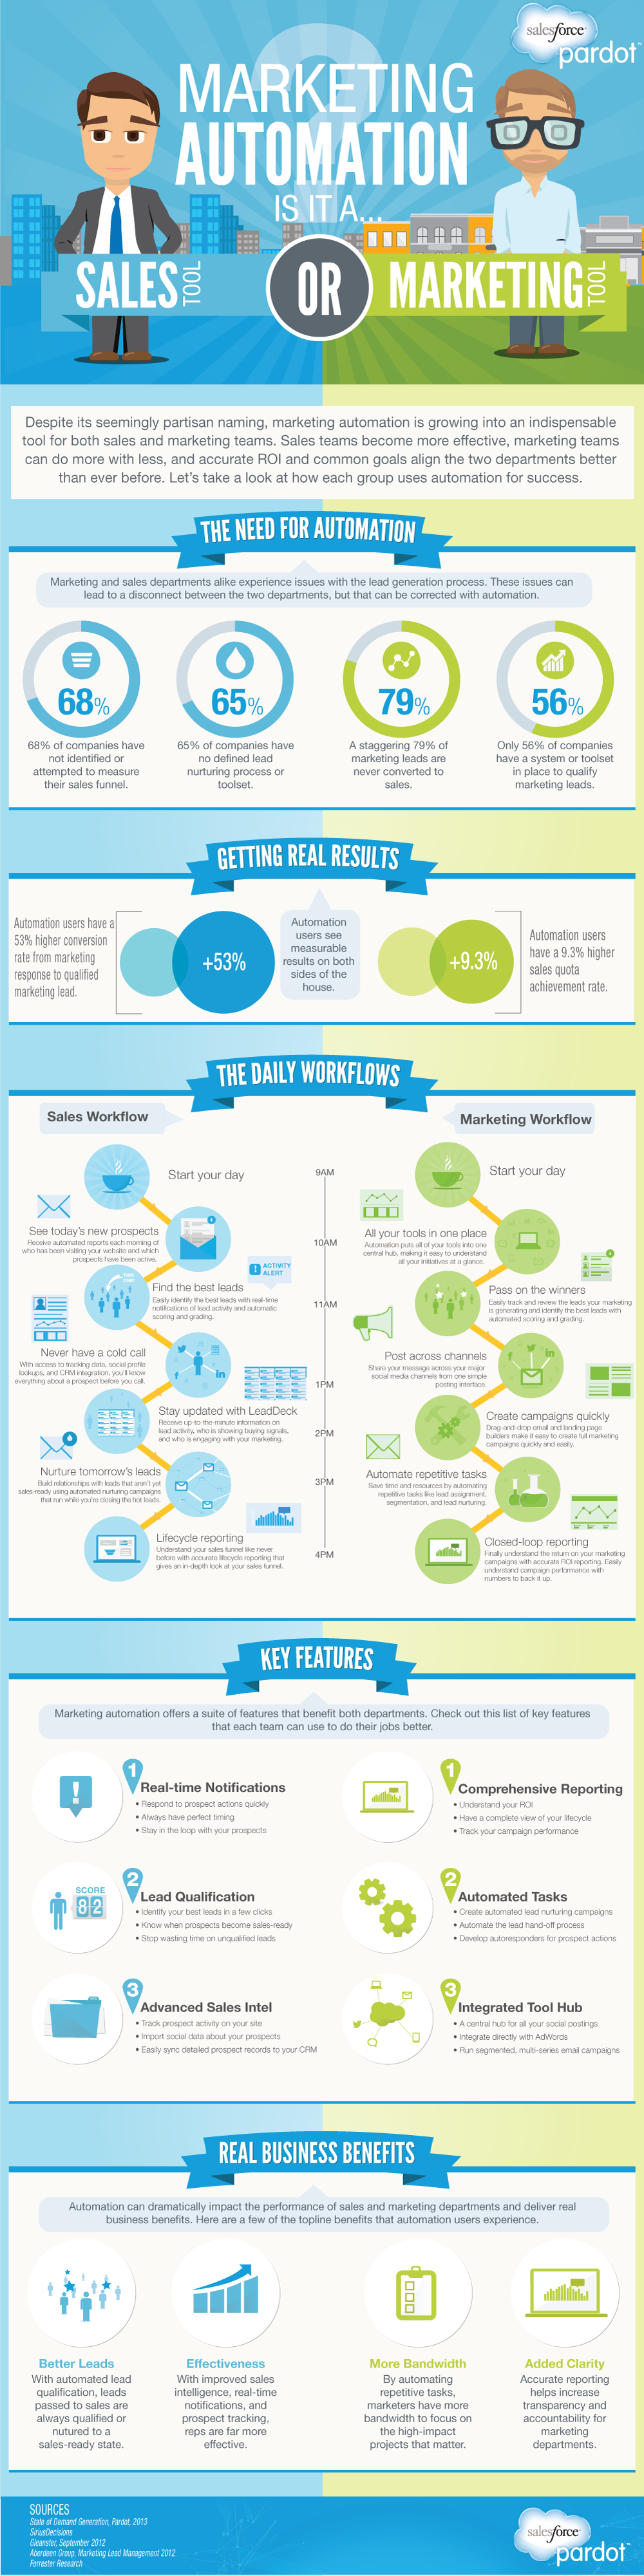 Marketing Automation: Sales or Marketing Tool? #infographic - An Infographic from Pardot